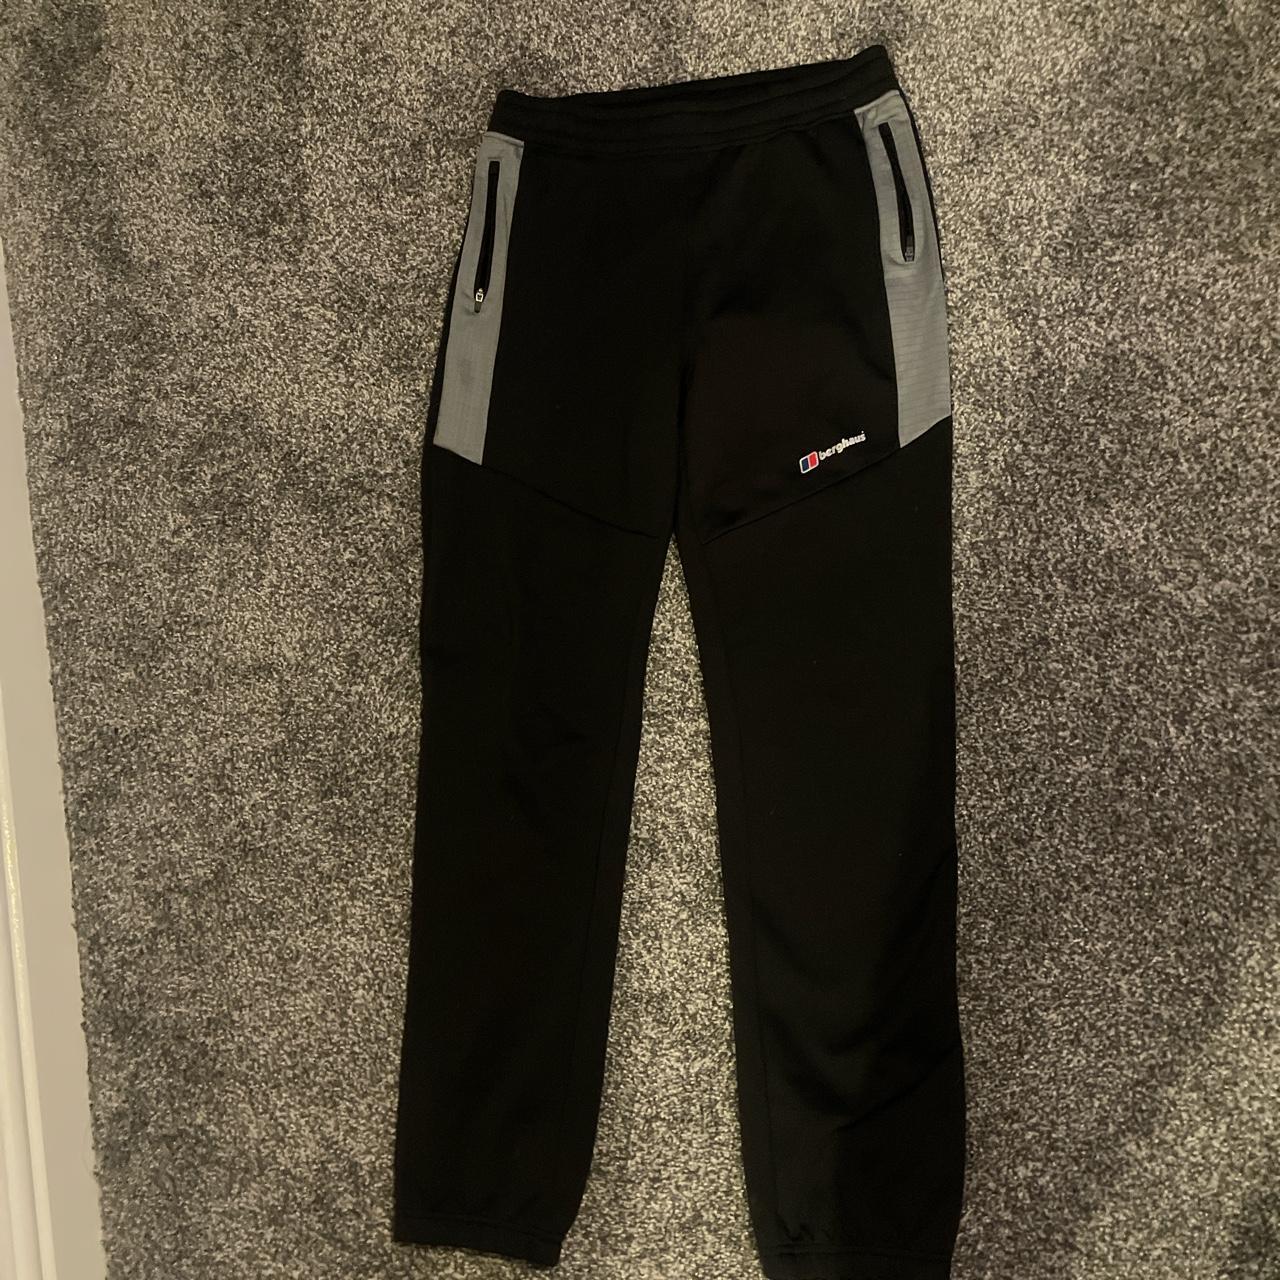 Brand new berghaus pants worn once but selling due... - Depop